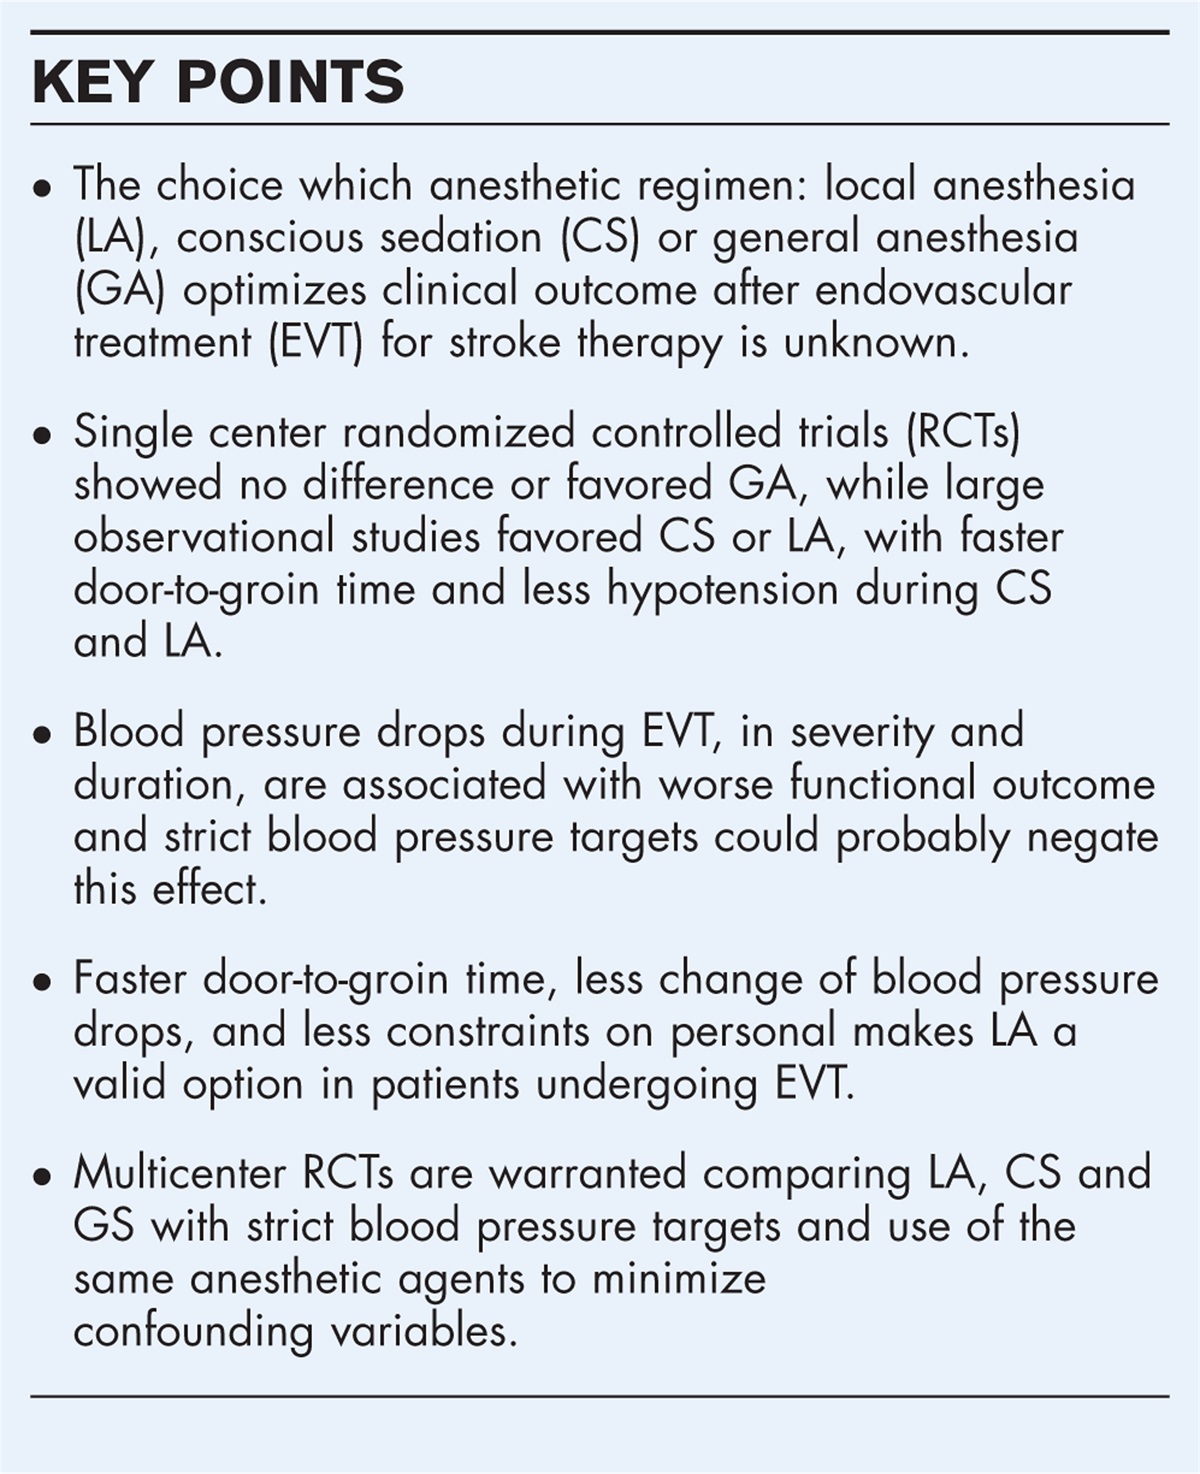 Anesthetic considerations for endovascular treatment in stroke therapy